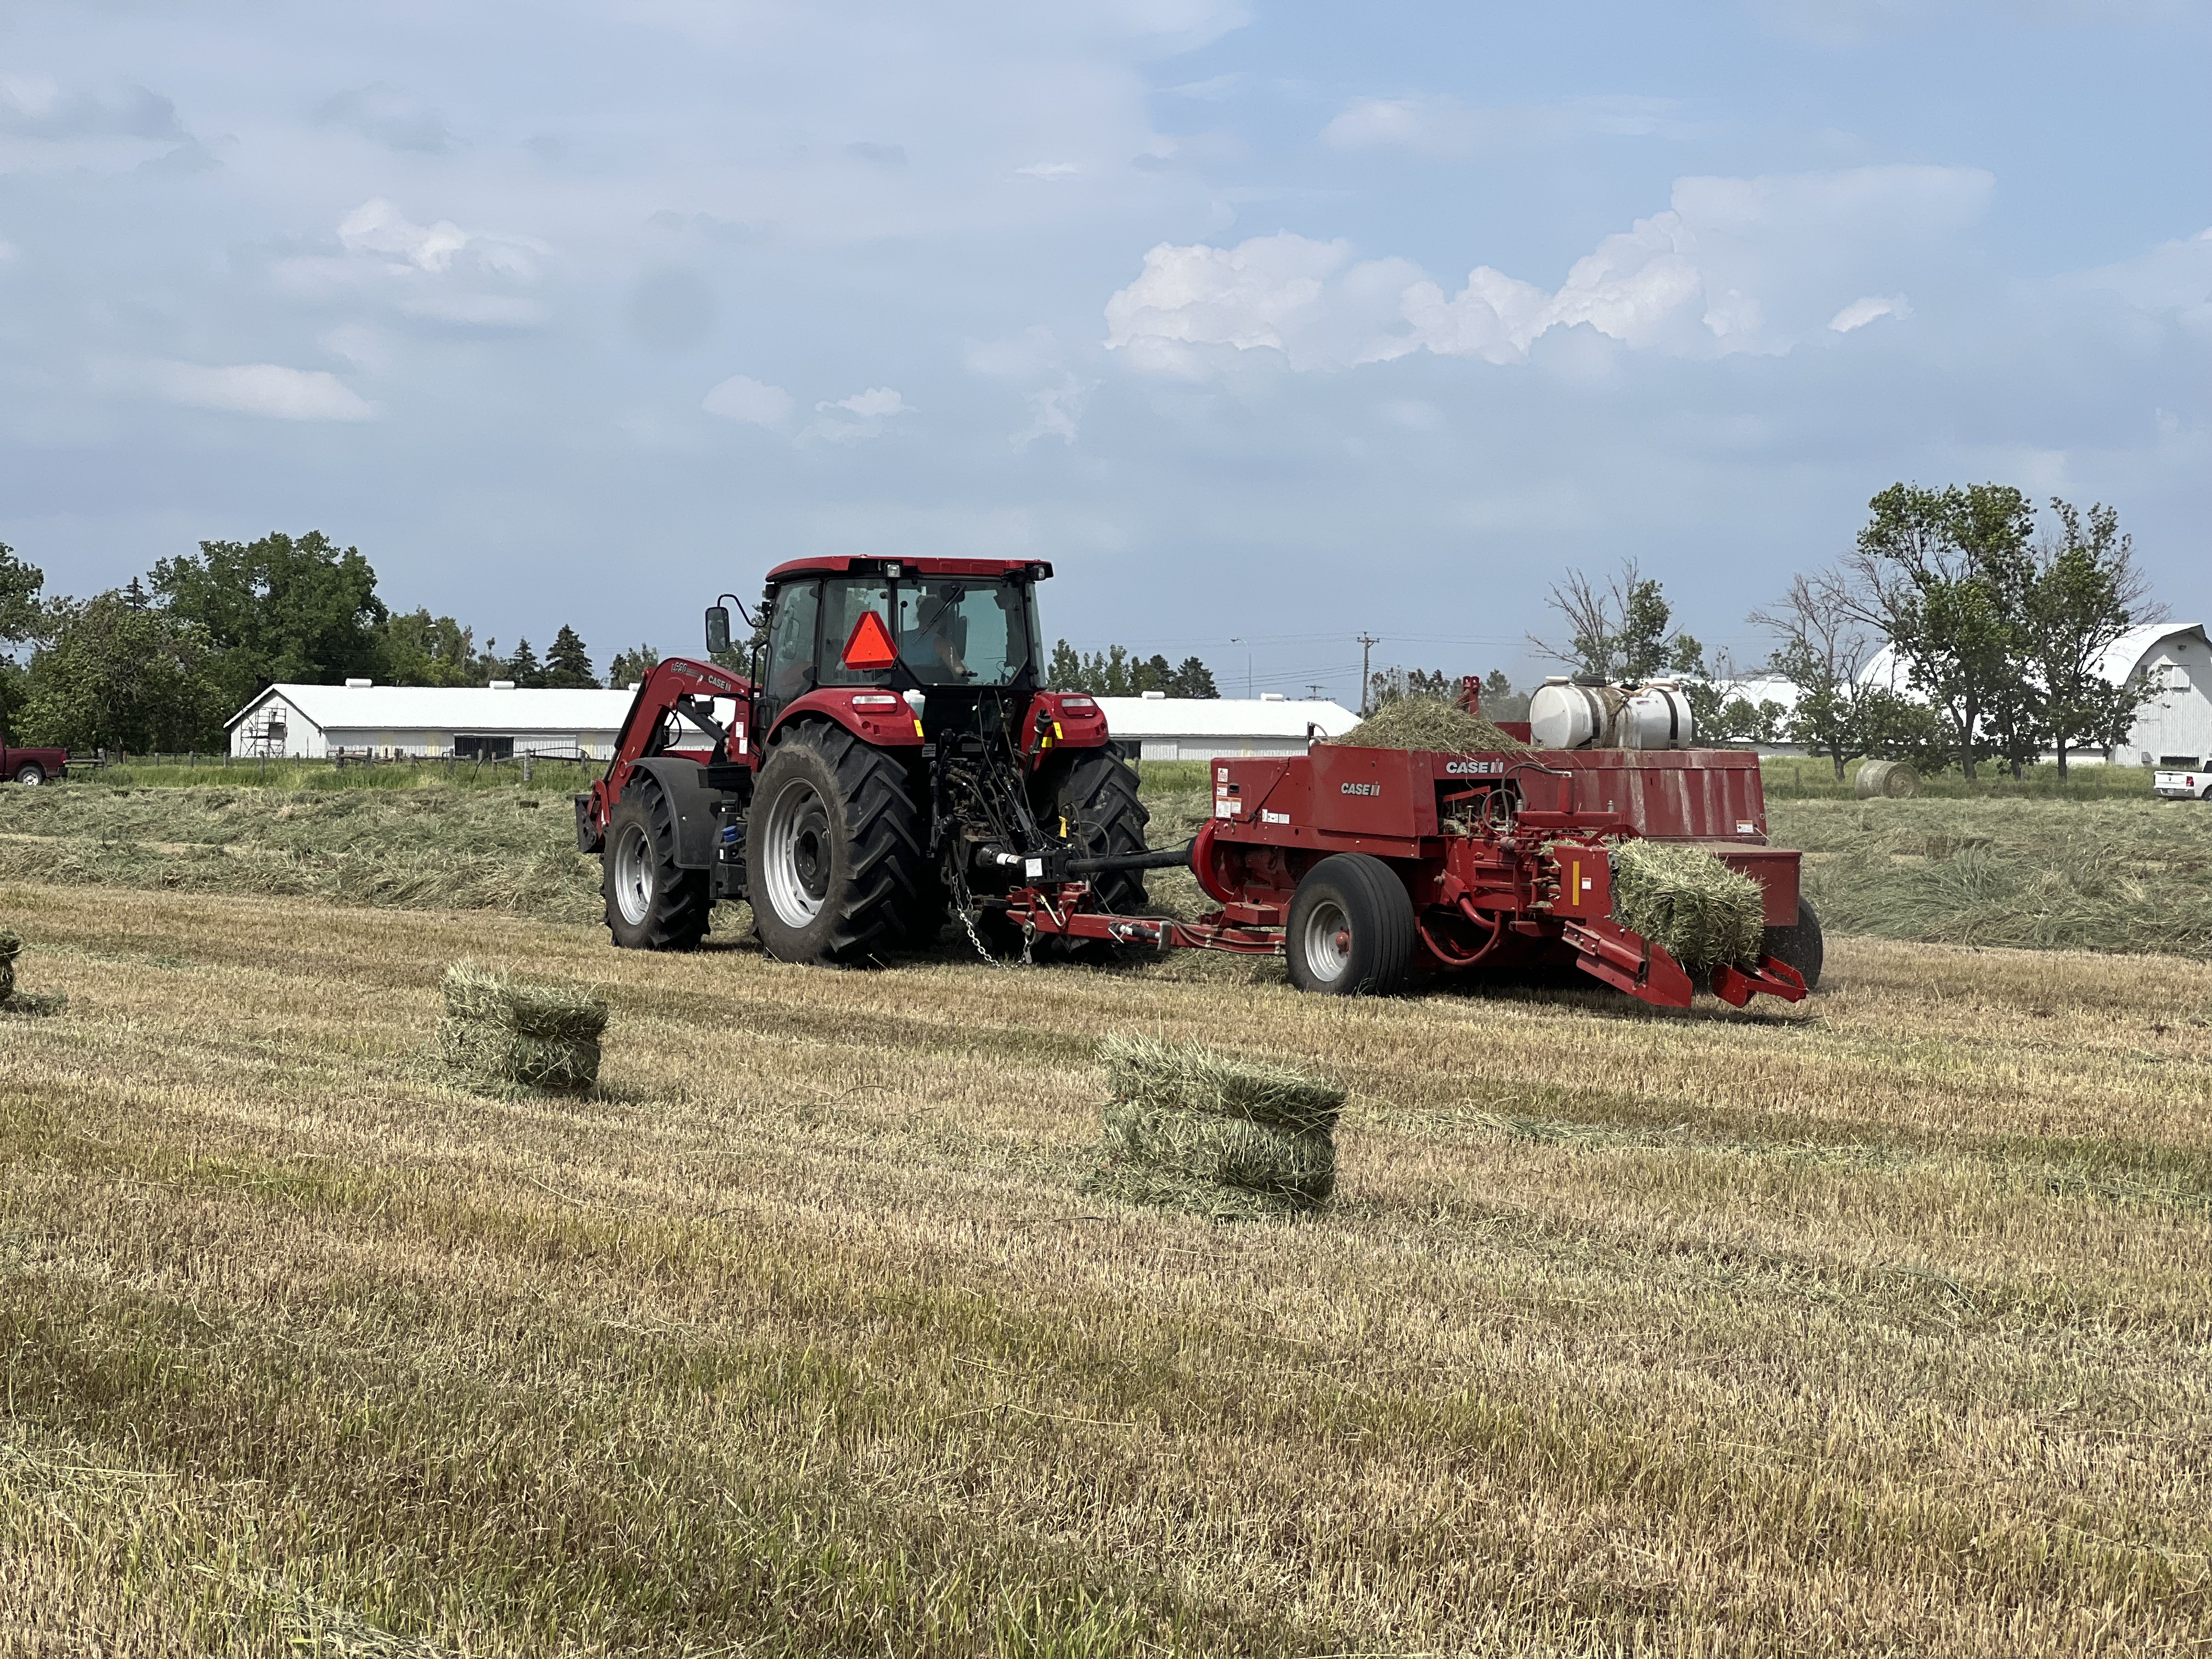 If hay remains wet for a period of time, or if moisture content is not down to the proper level prior to baling, heat damage can occur. (NDSU photo)